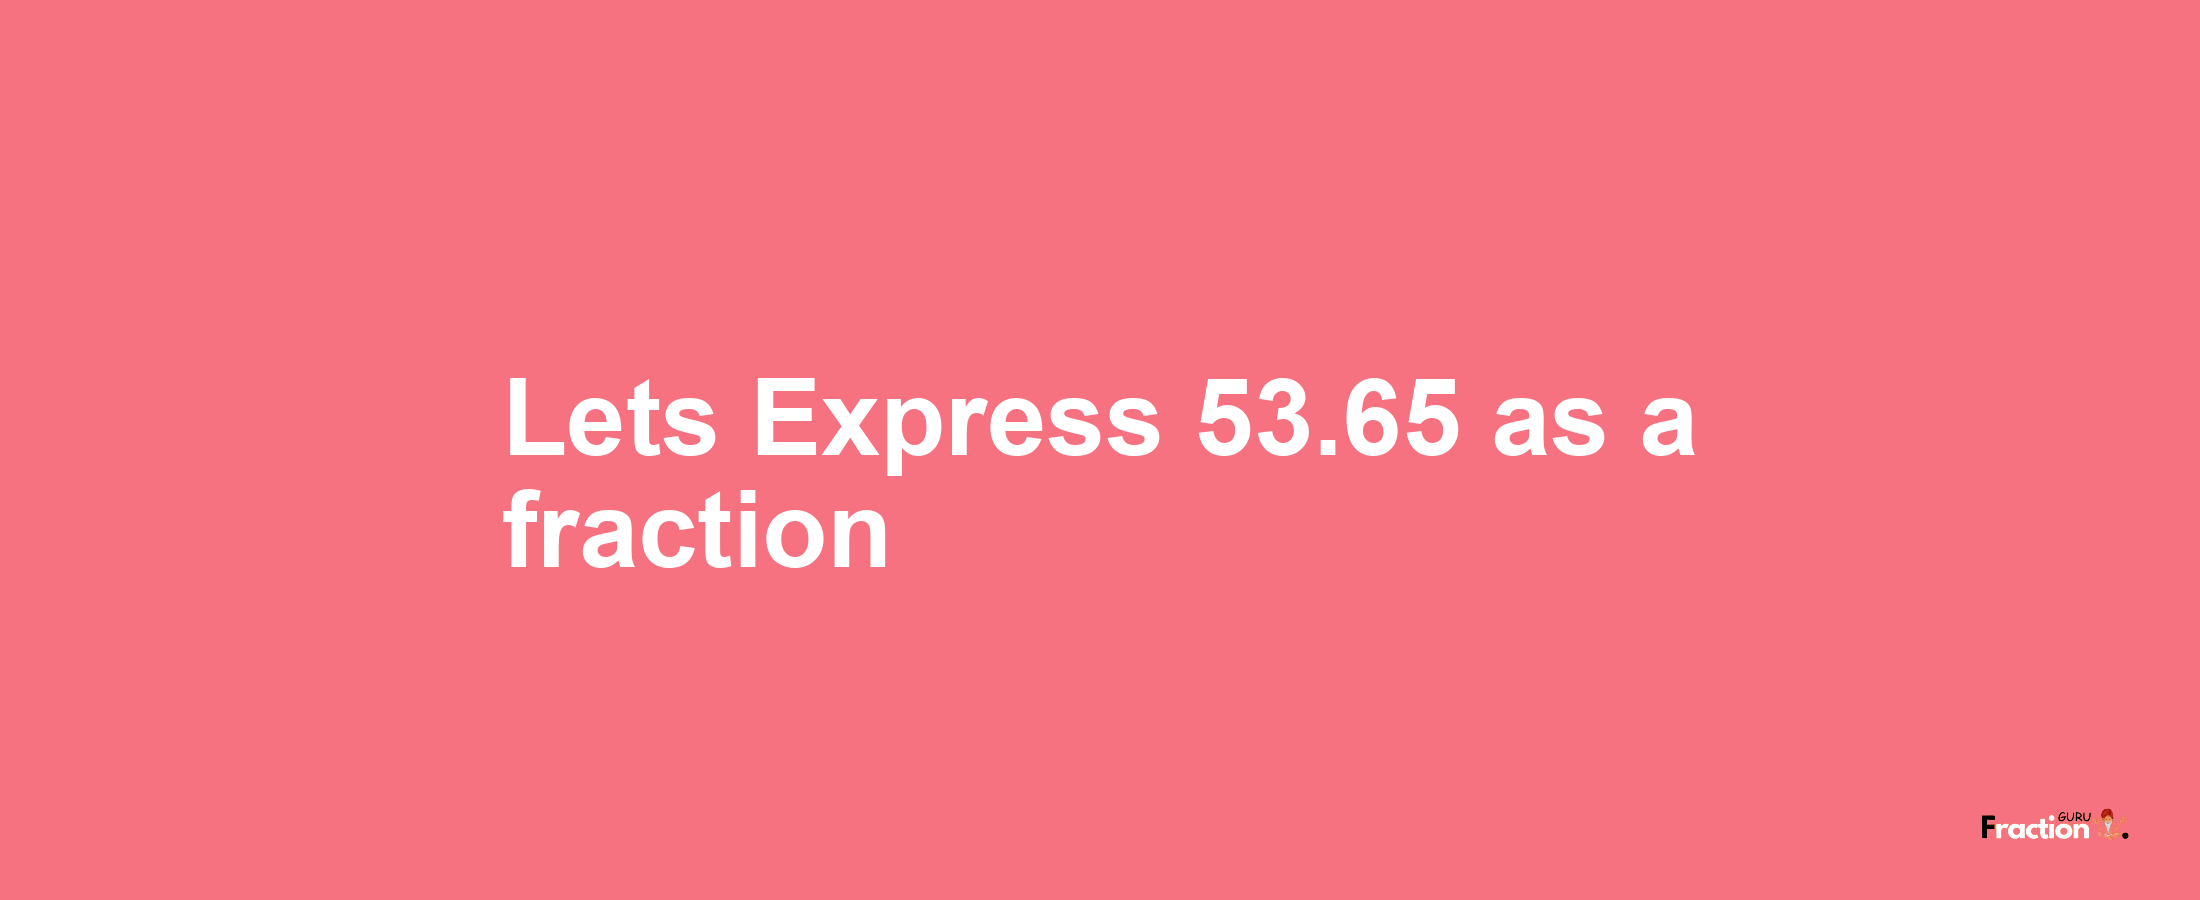 Lets Express 53.65 as afraction